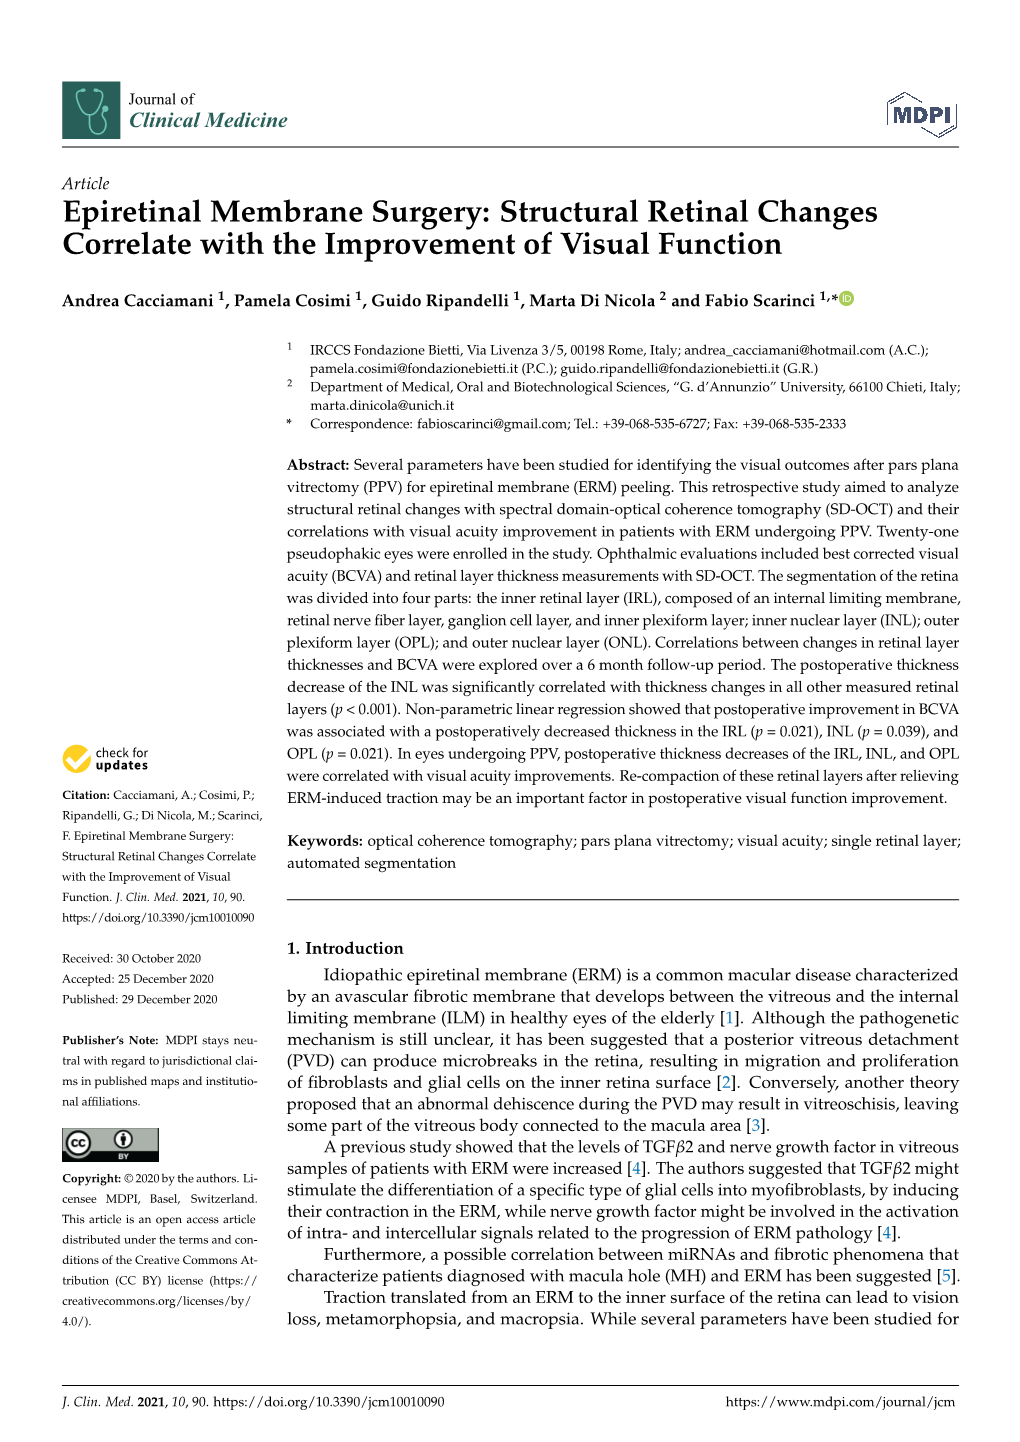 Epiretinal Membrane Surgery: Structural Retinal Changes Correlate with the Improvement of Visual Function